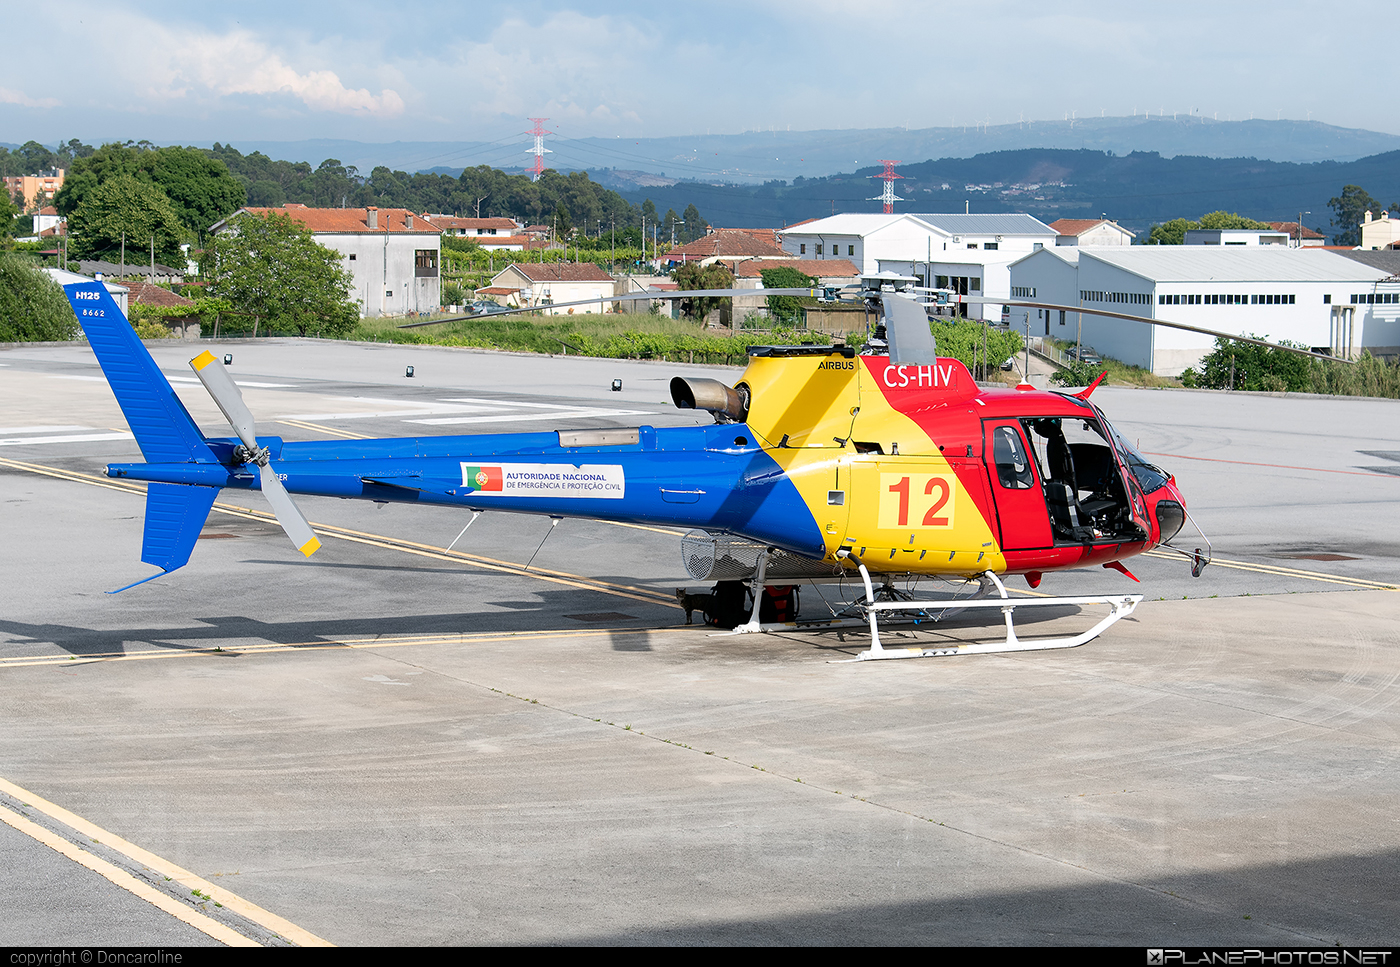 Airbus Helicopters H125 - CS-HIV operated by HTA Helicópteros #airbushelicopters #as350 #as350ecureuil #h125 #htahelicopteros